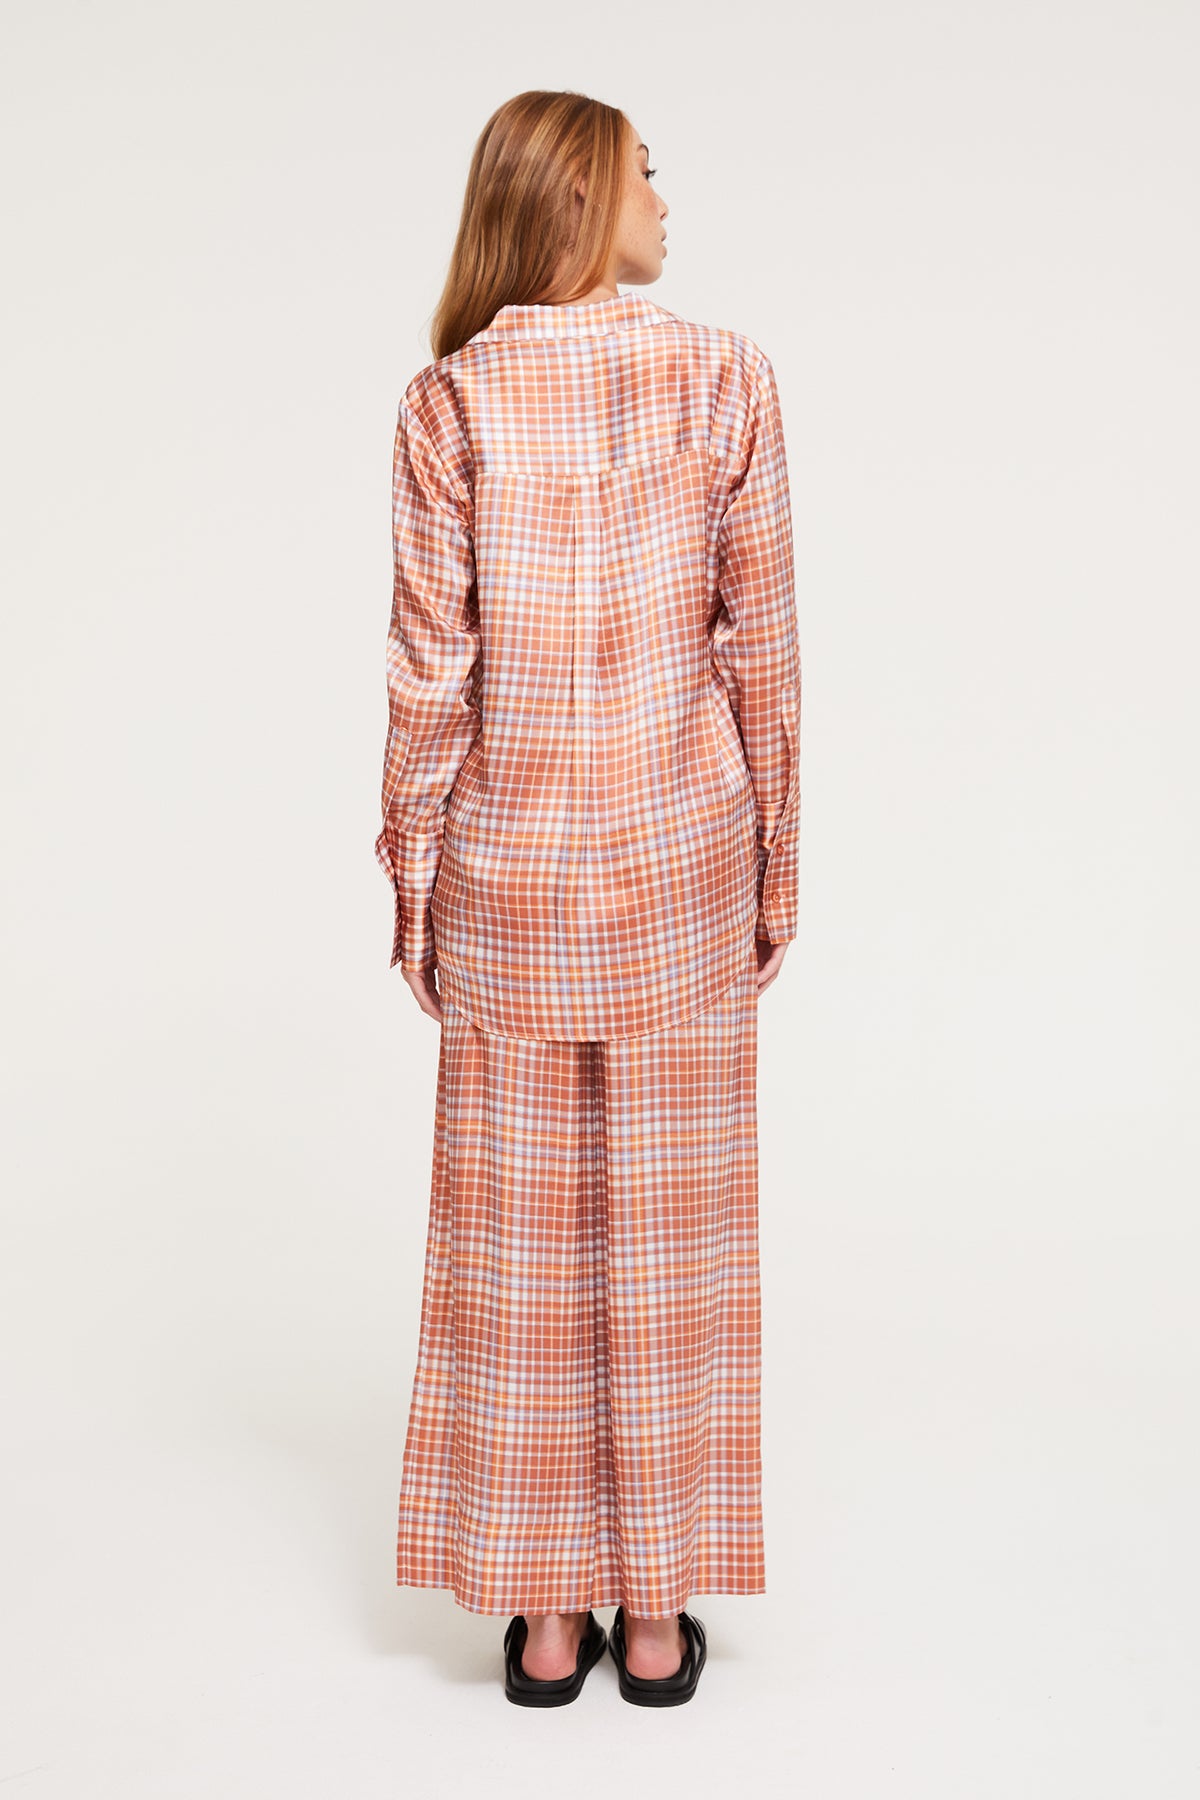 Oversized Silk PJ Set in Prism Check from Ginia